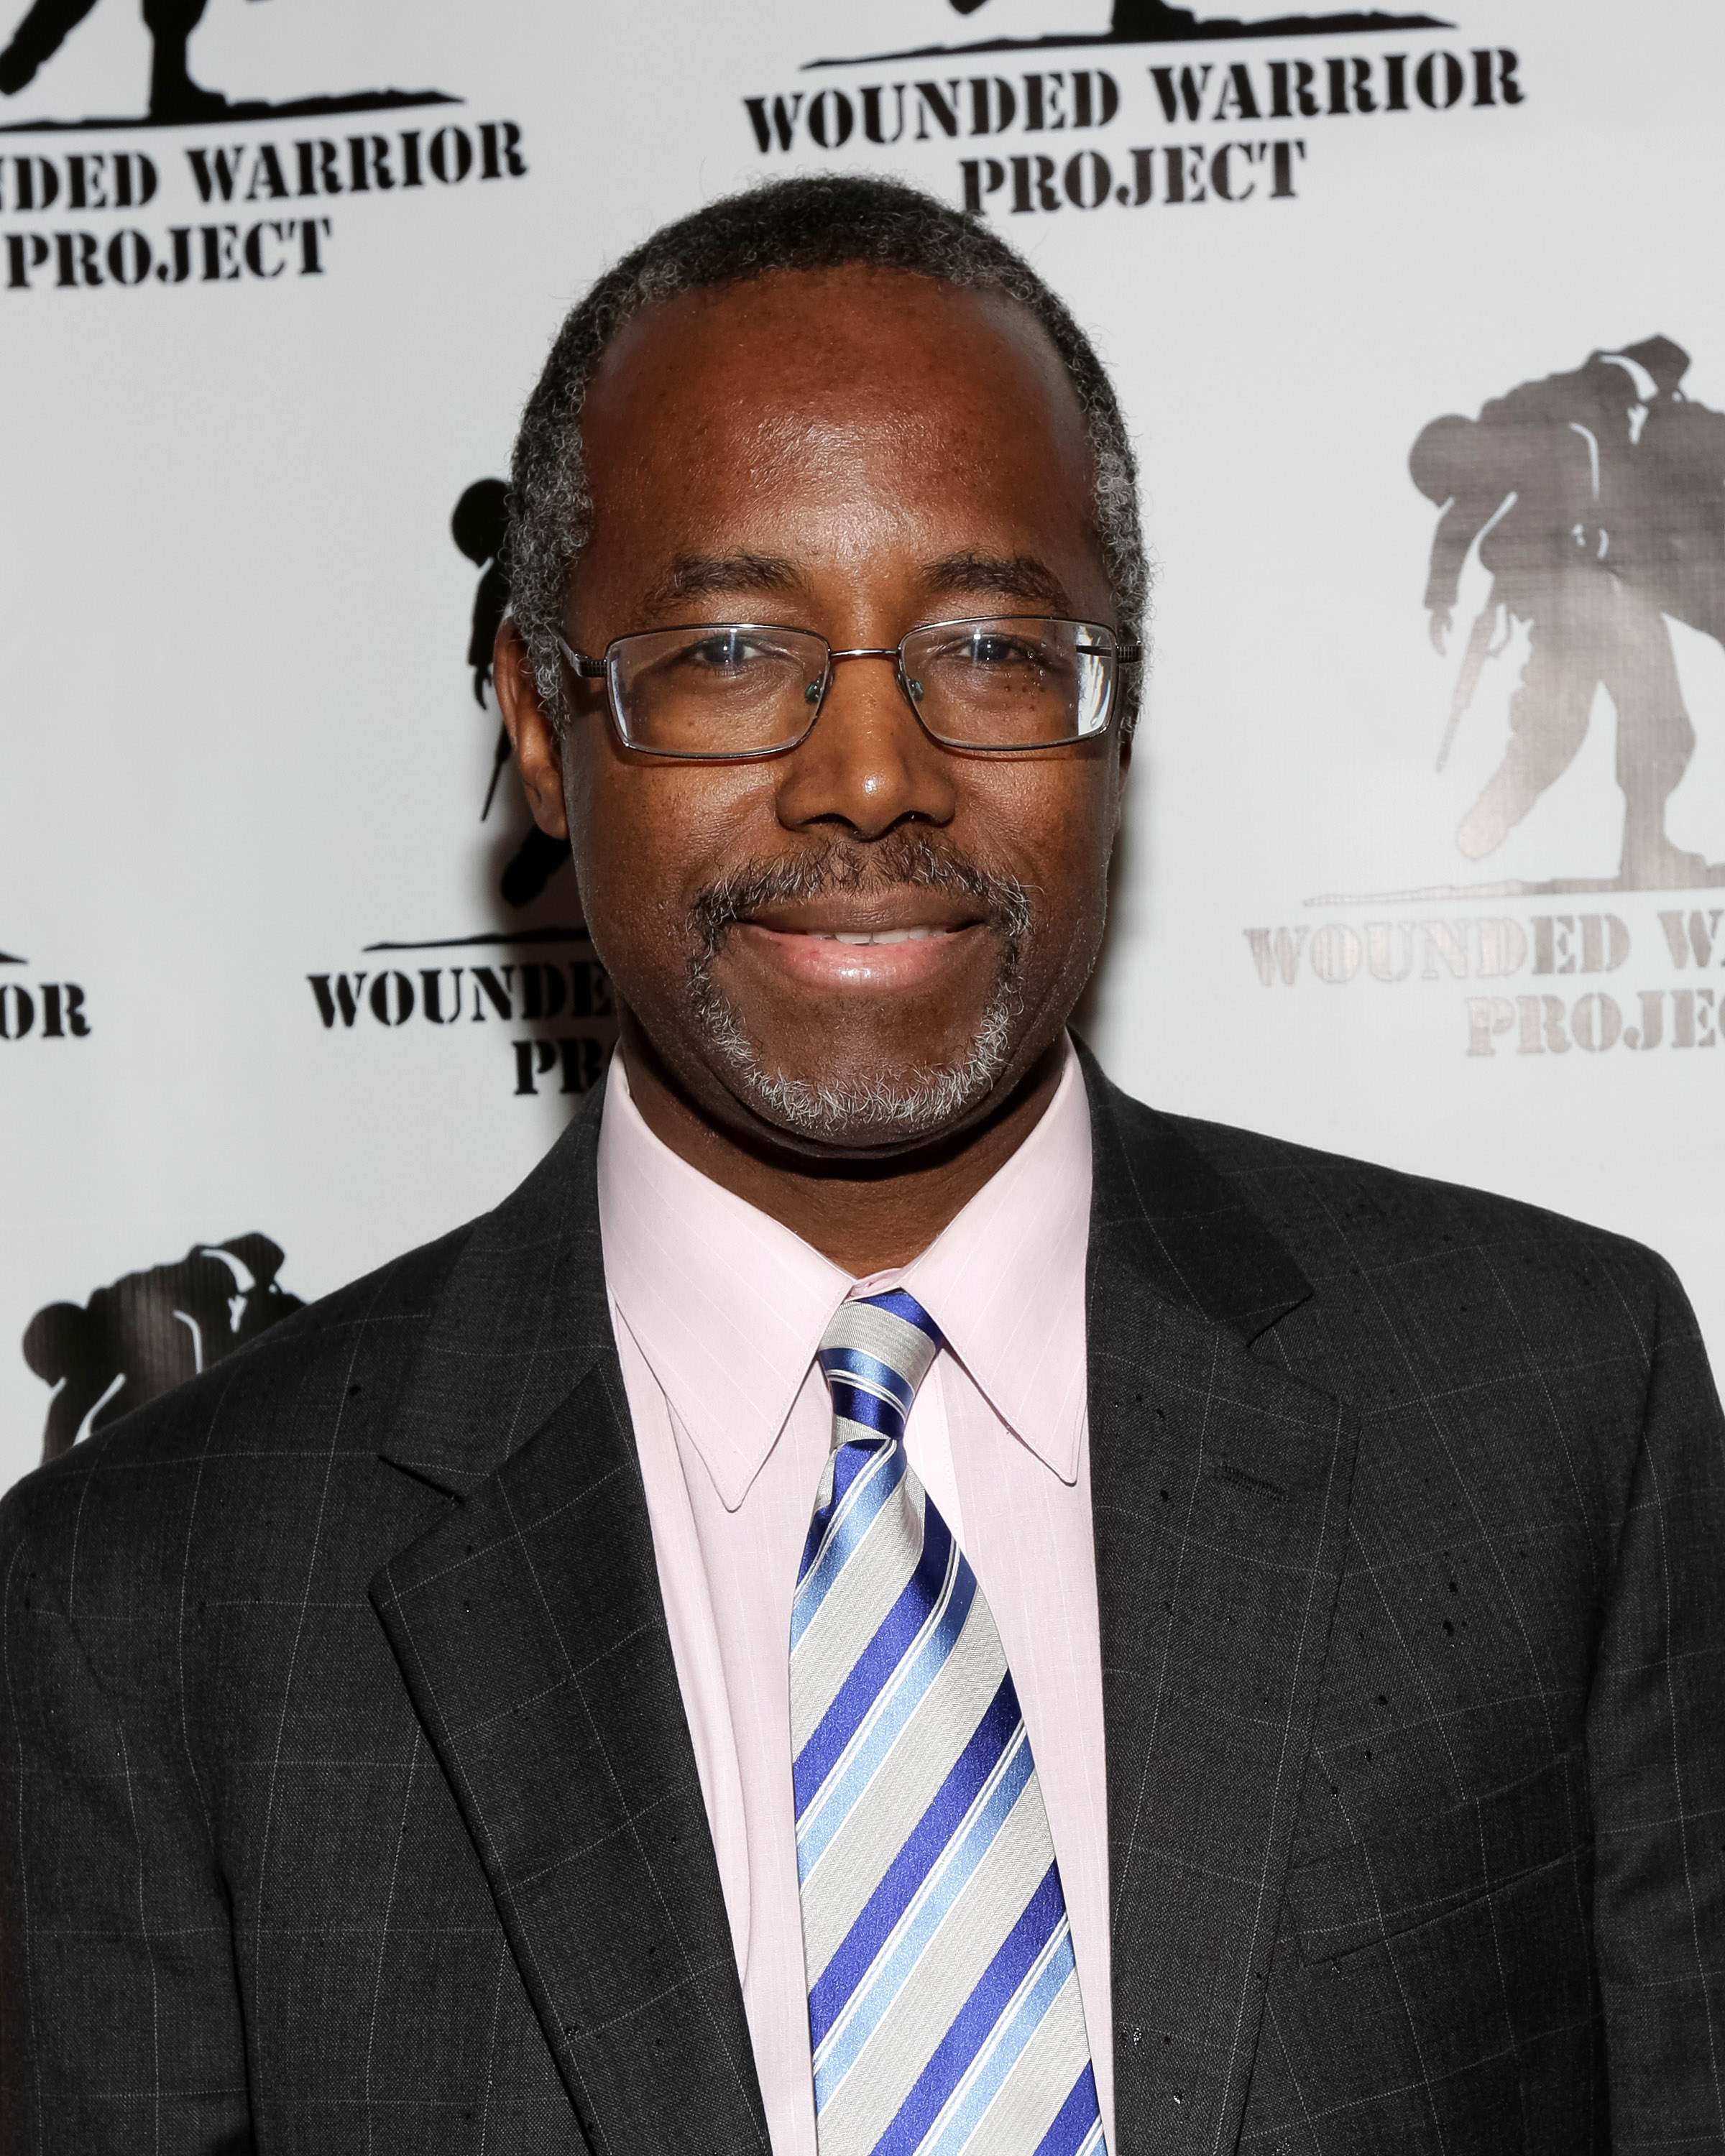 Ben Carson at the 2014 Wounded Warrior Project Benefit on November 17, 2014 in New York City.